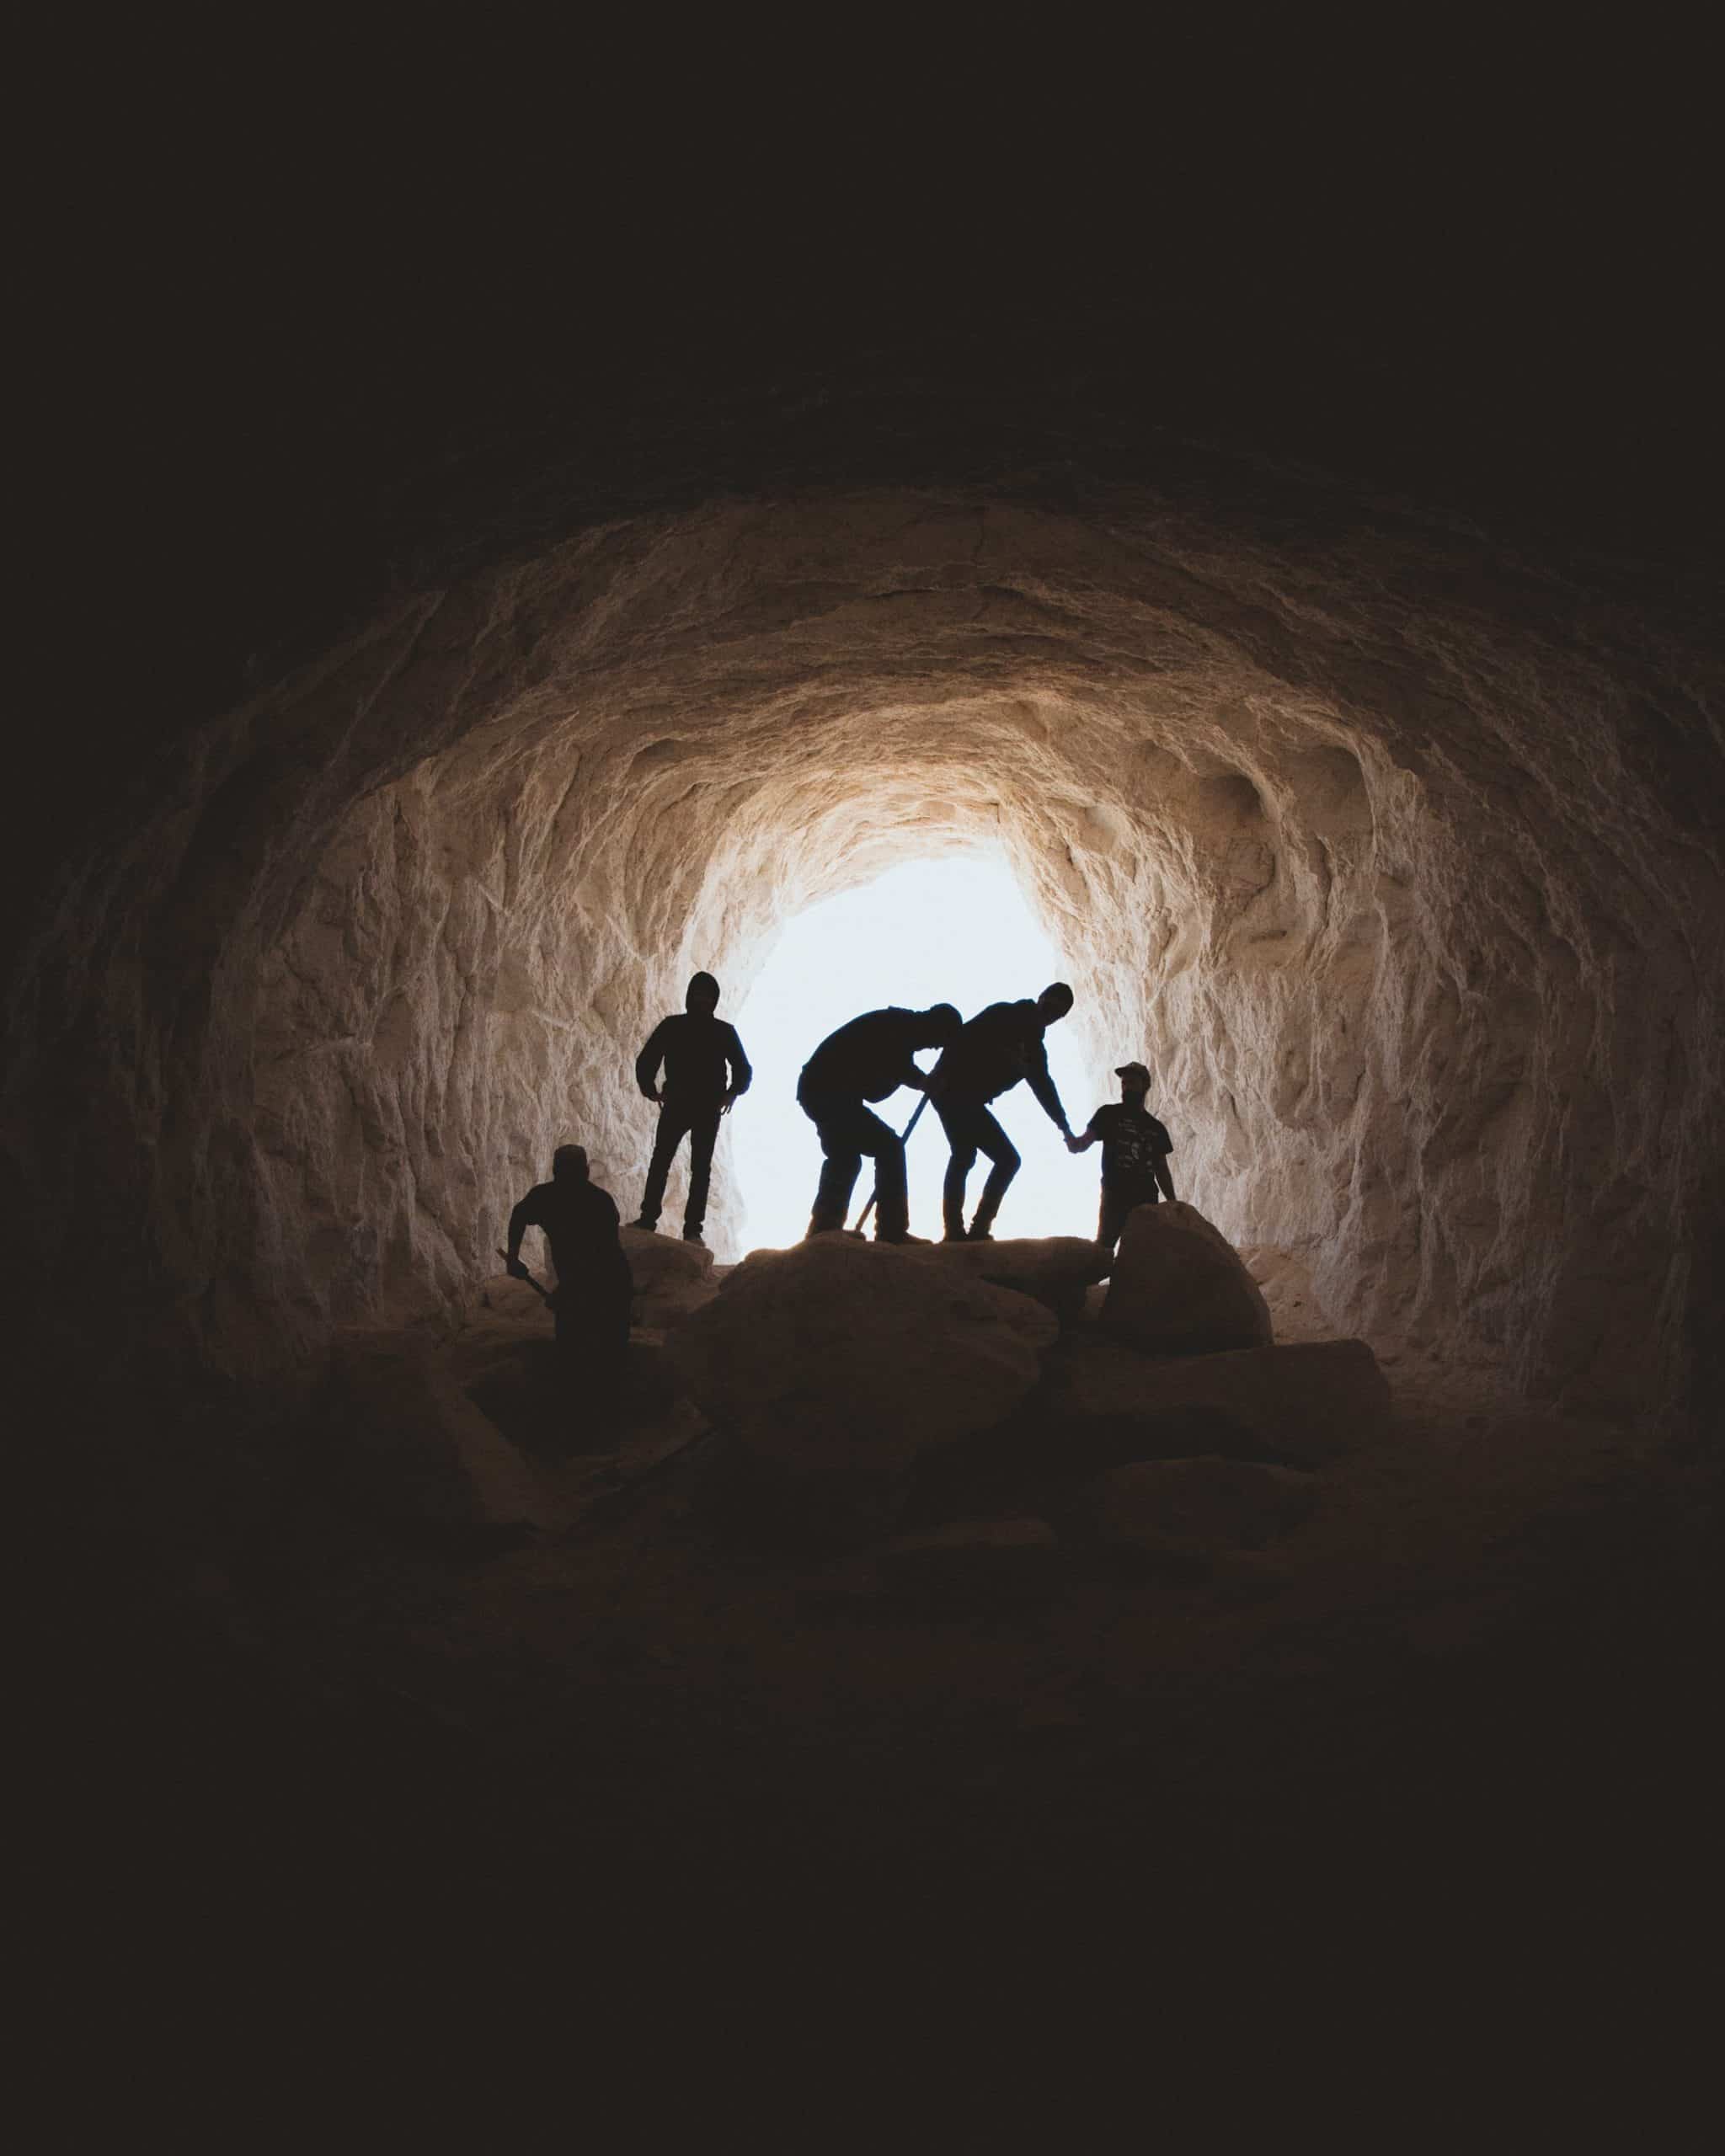 A group of cavers in silhouette with the light from the cave entrance